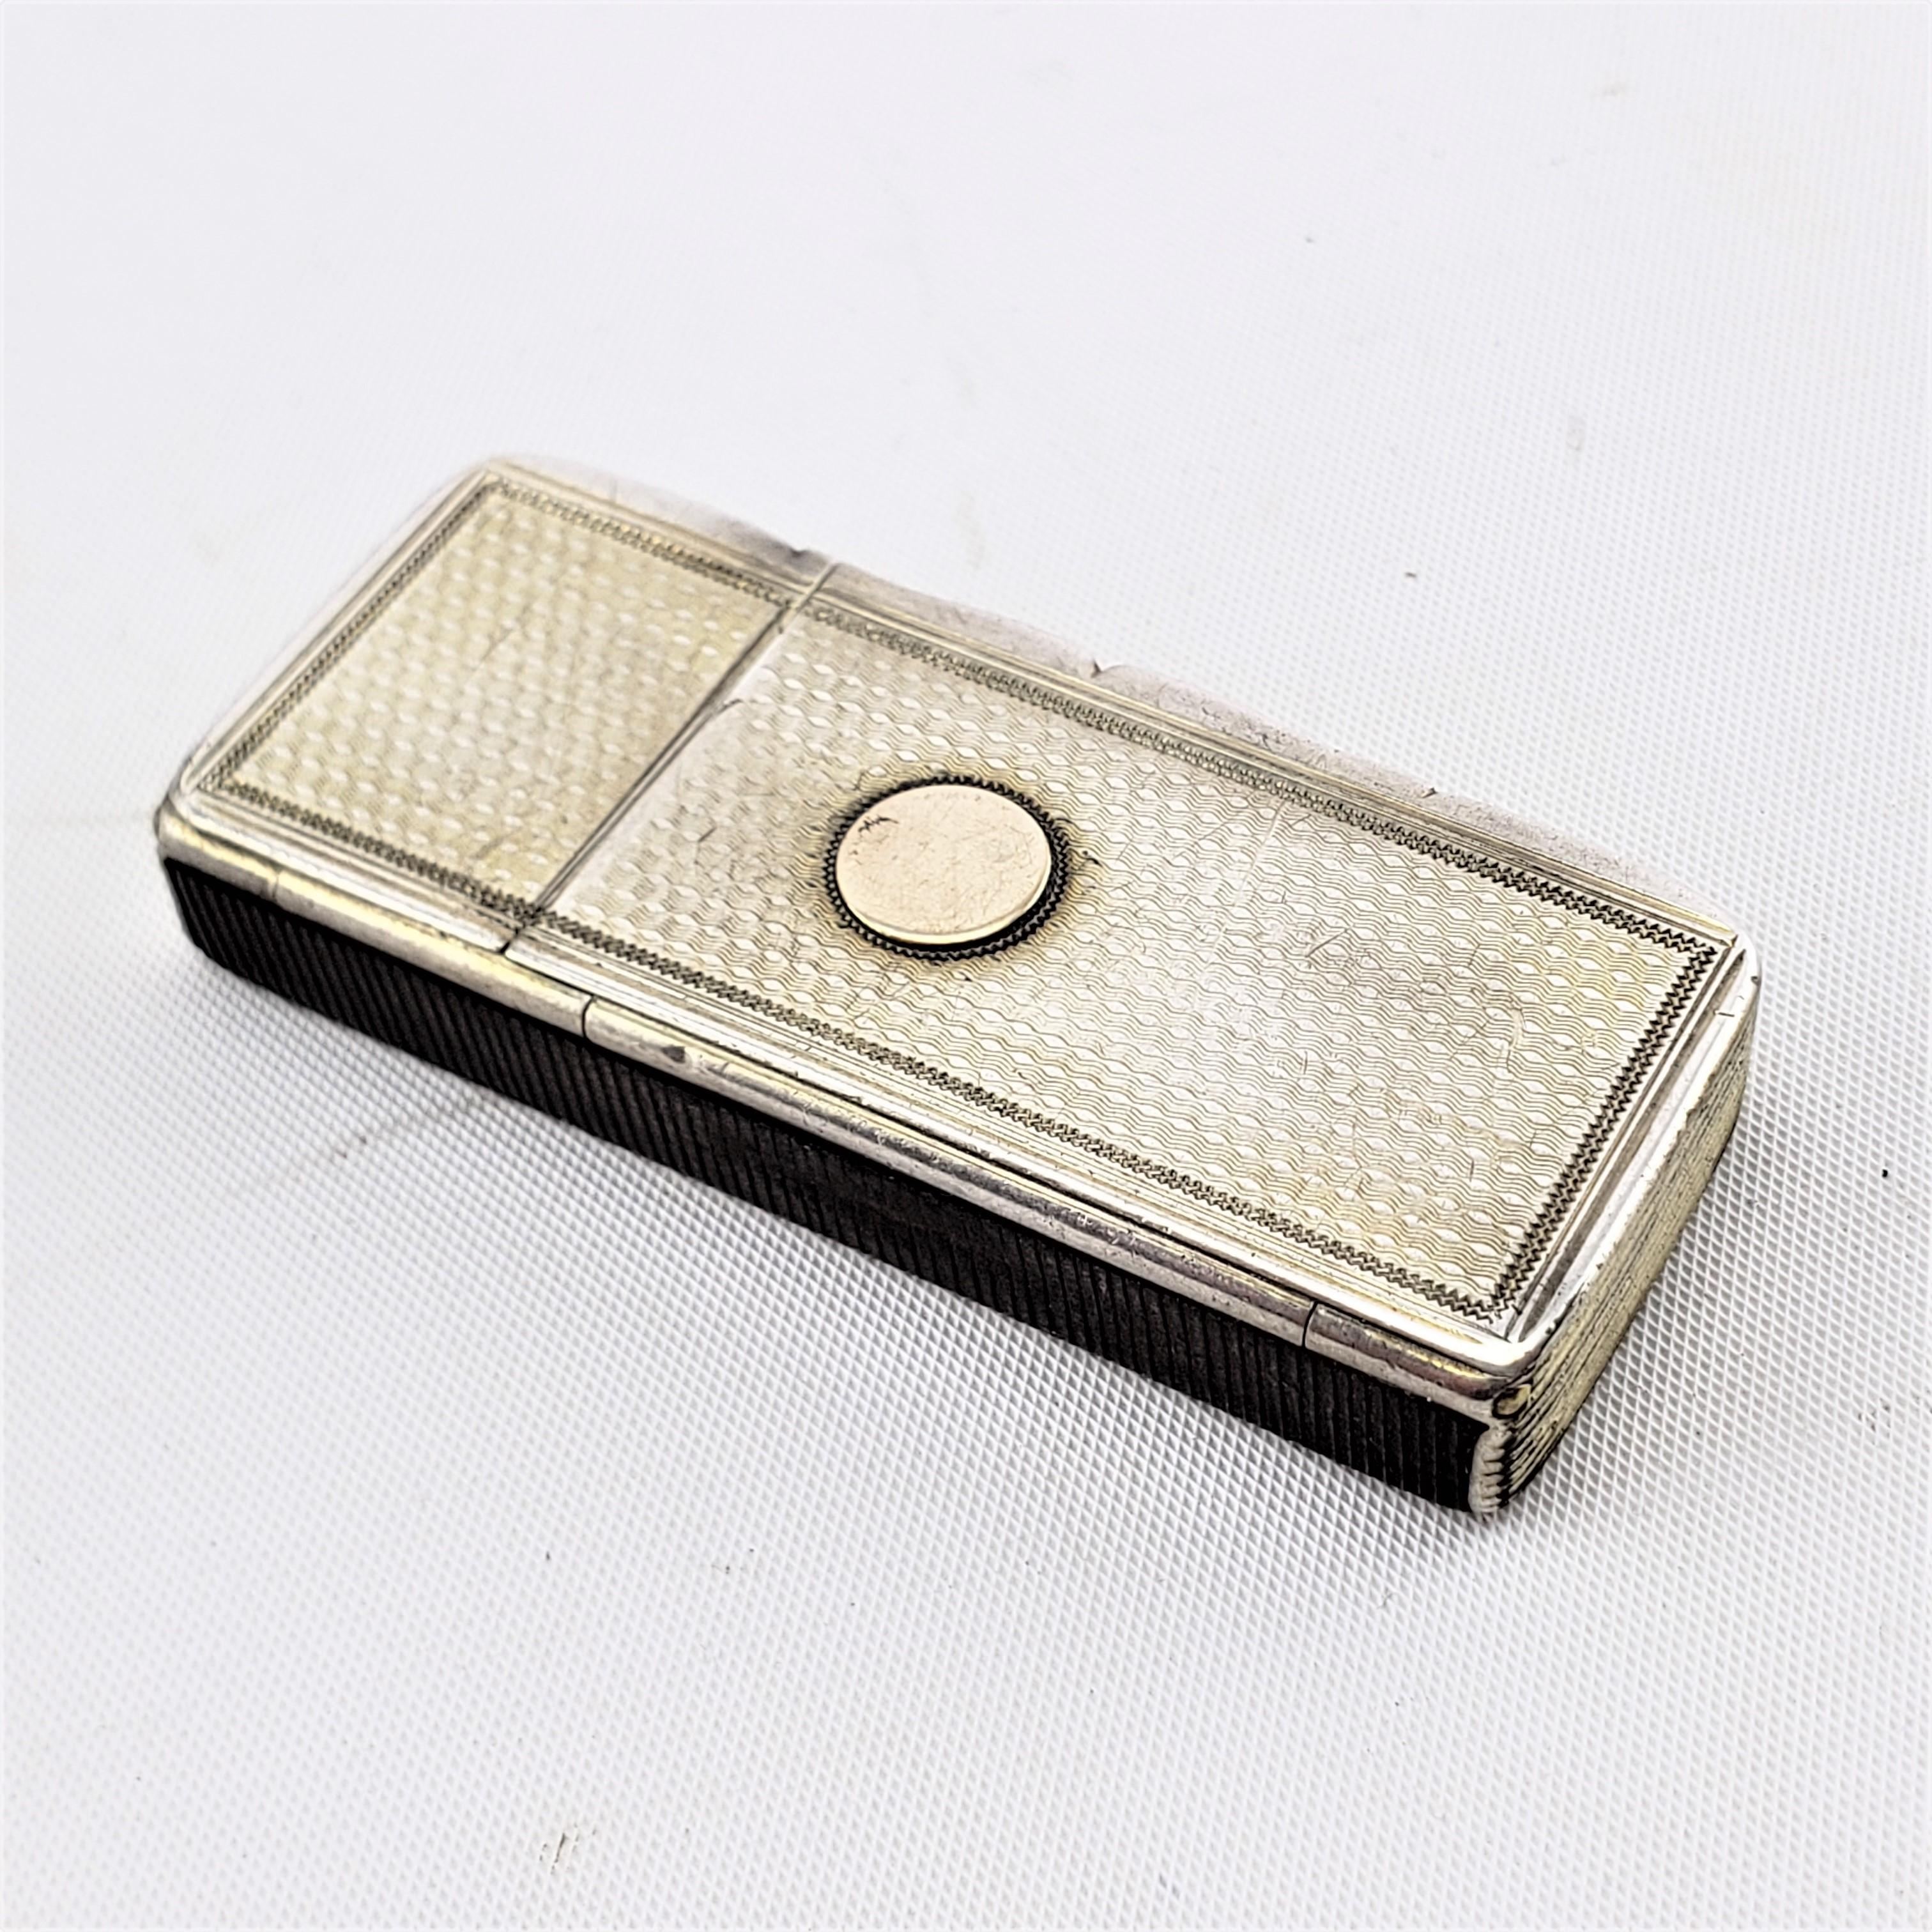 This antique double compartment snuff box is hallmarked by an unknown maker, and originated from England, dating to approximately 1900 and done in a period Edwardian style. The box is composed of sterling silver and has two hinged lids with an